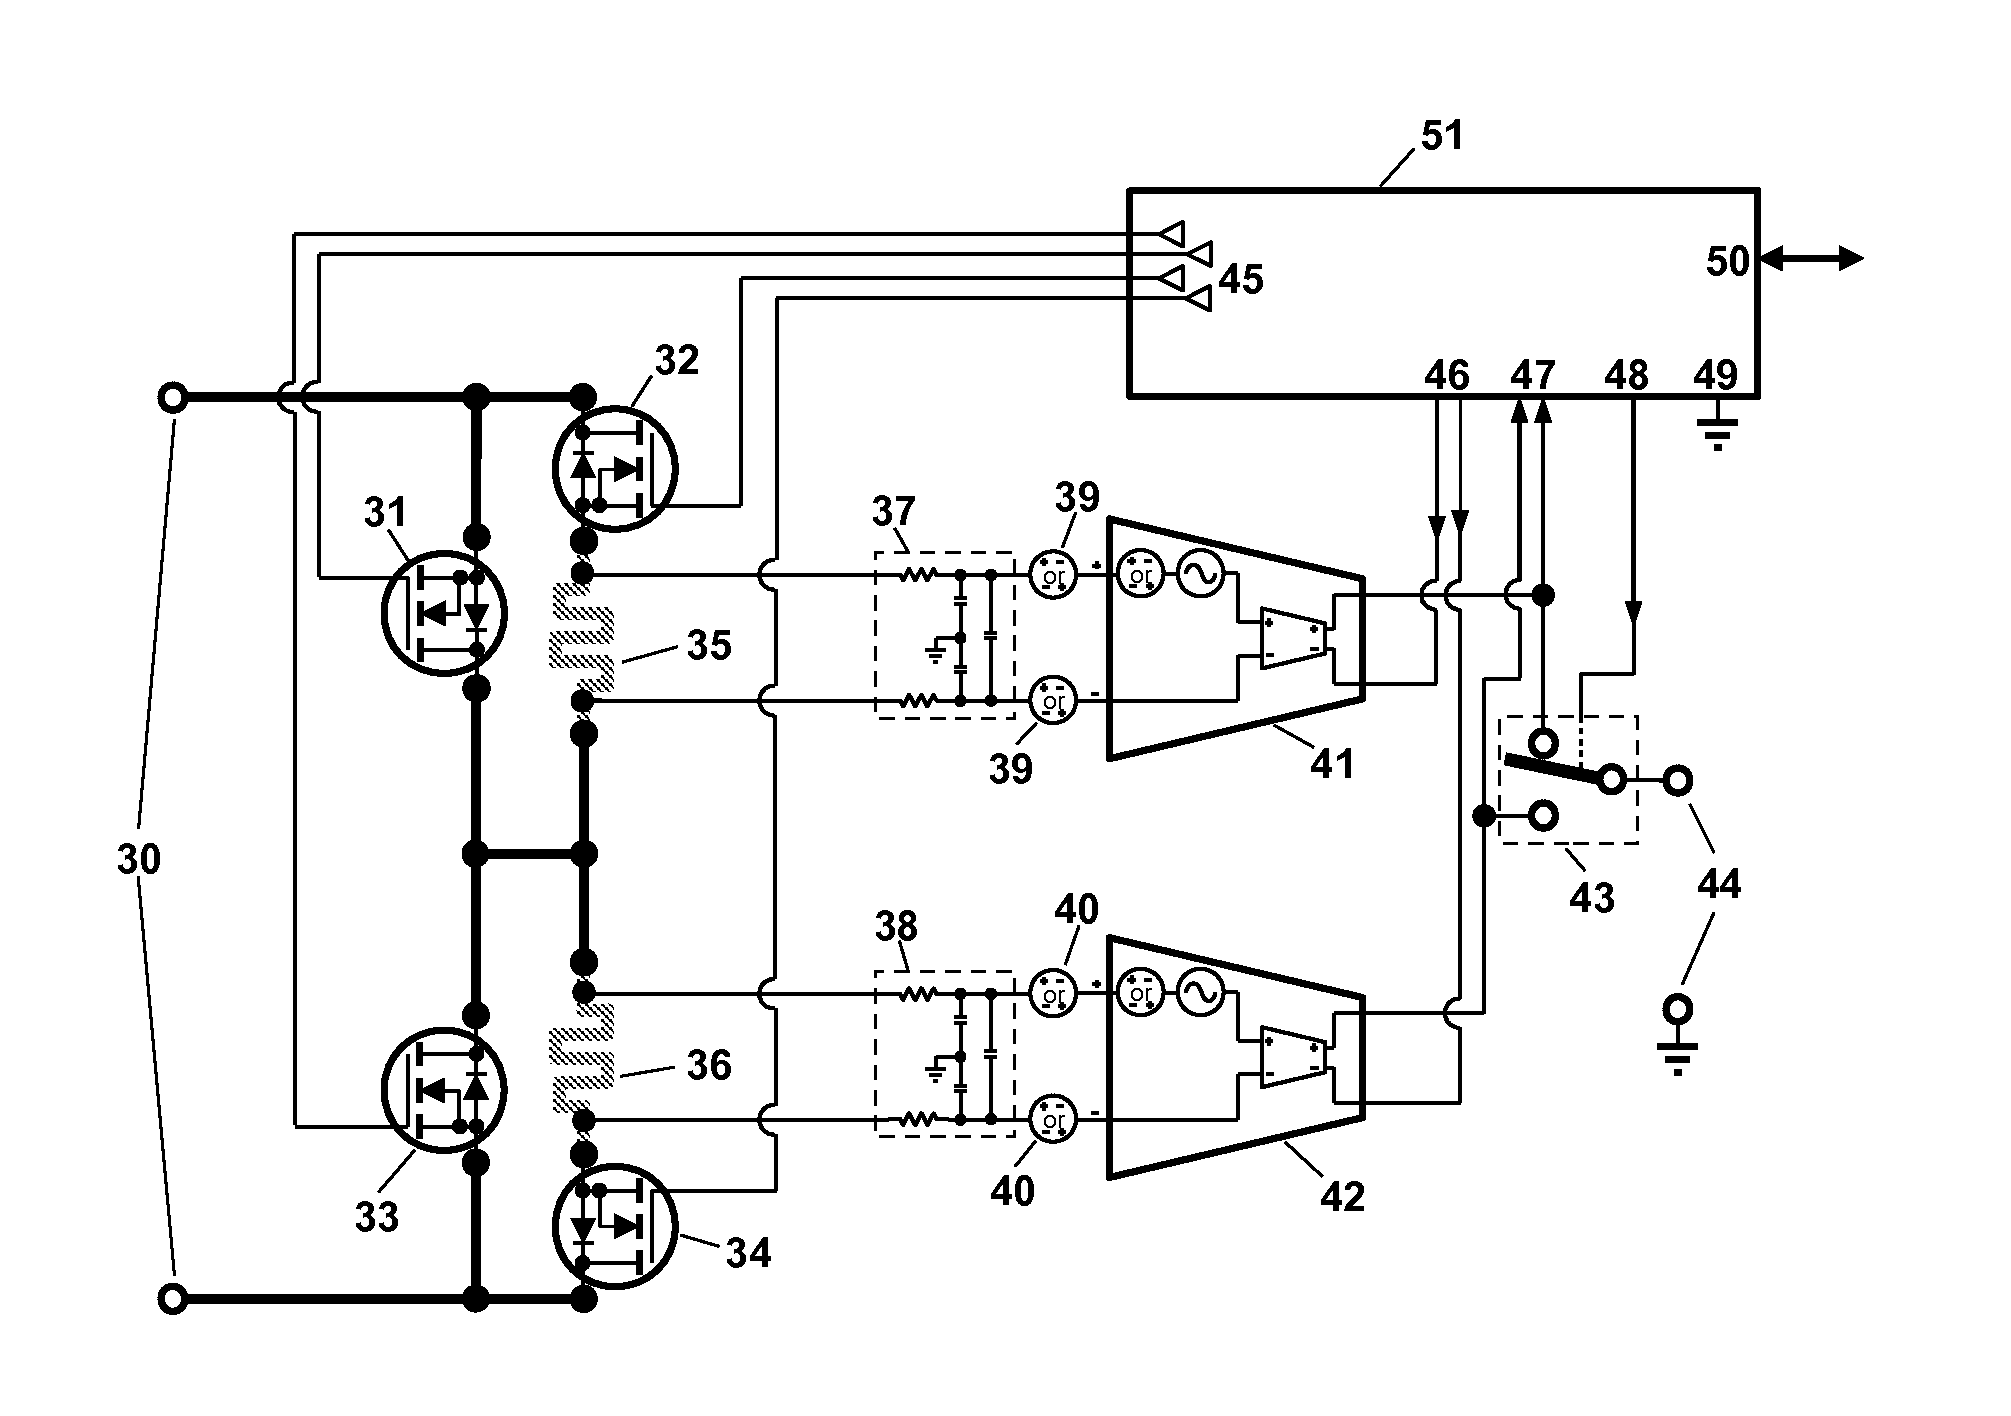 High-accuracy low-power current sensor with large dynamic range